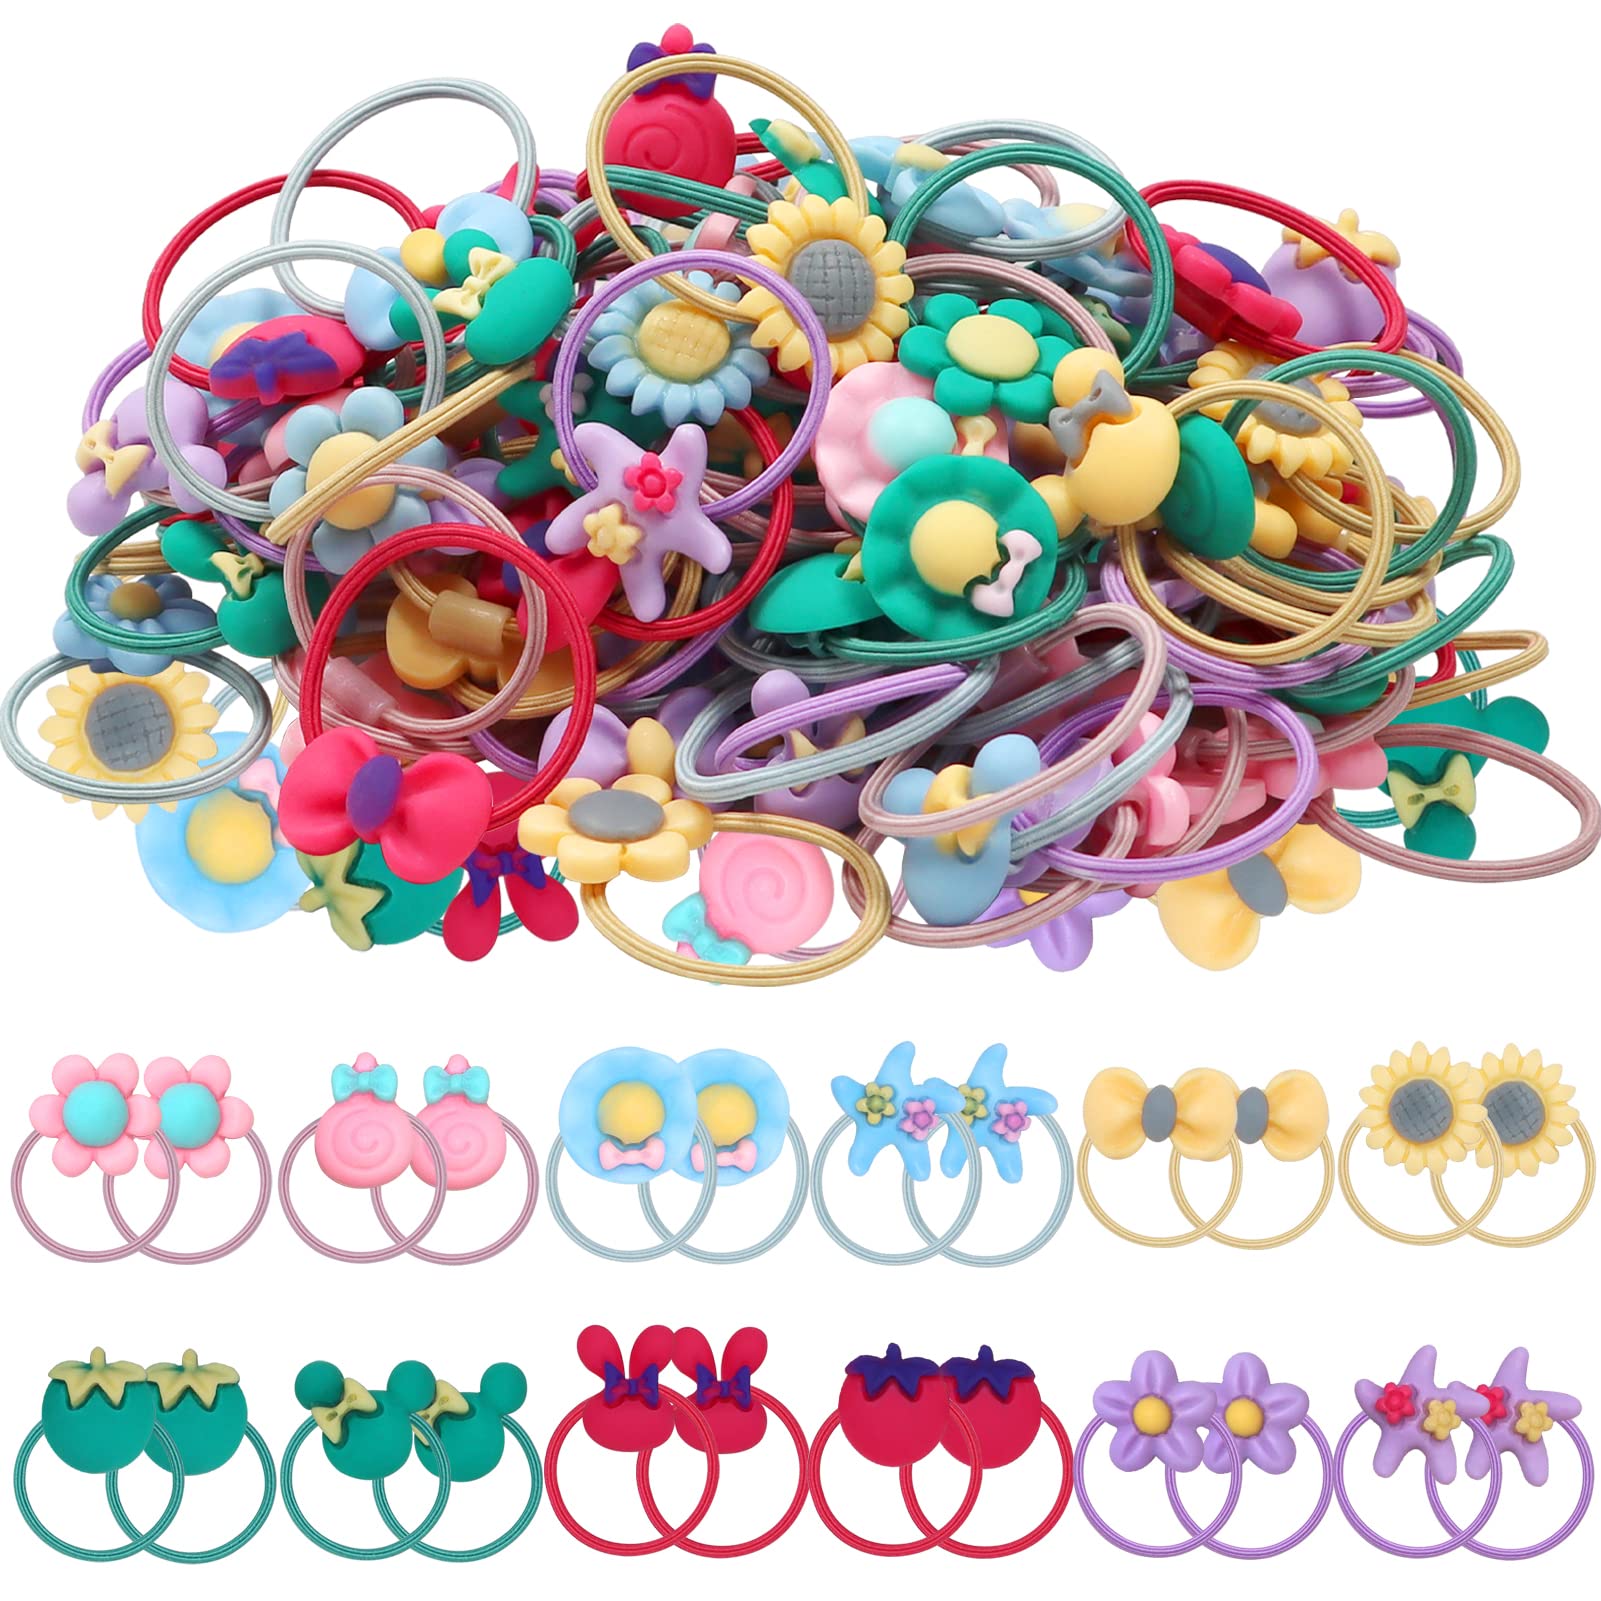 NIUREDLTD Pack Hair Ties Baby Toddlers Girls Elastics Hair Bands Black  Colorful Small Rubber Bands Ponytail Pigtails Holders Not Harm To Hair -  Walmart.com